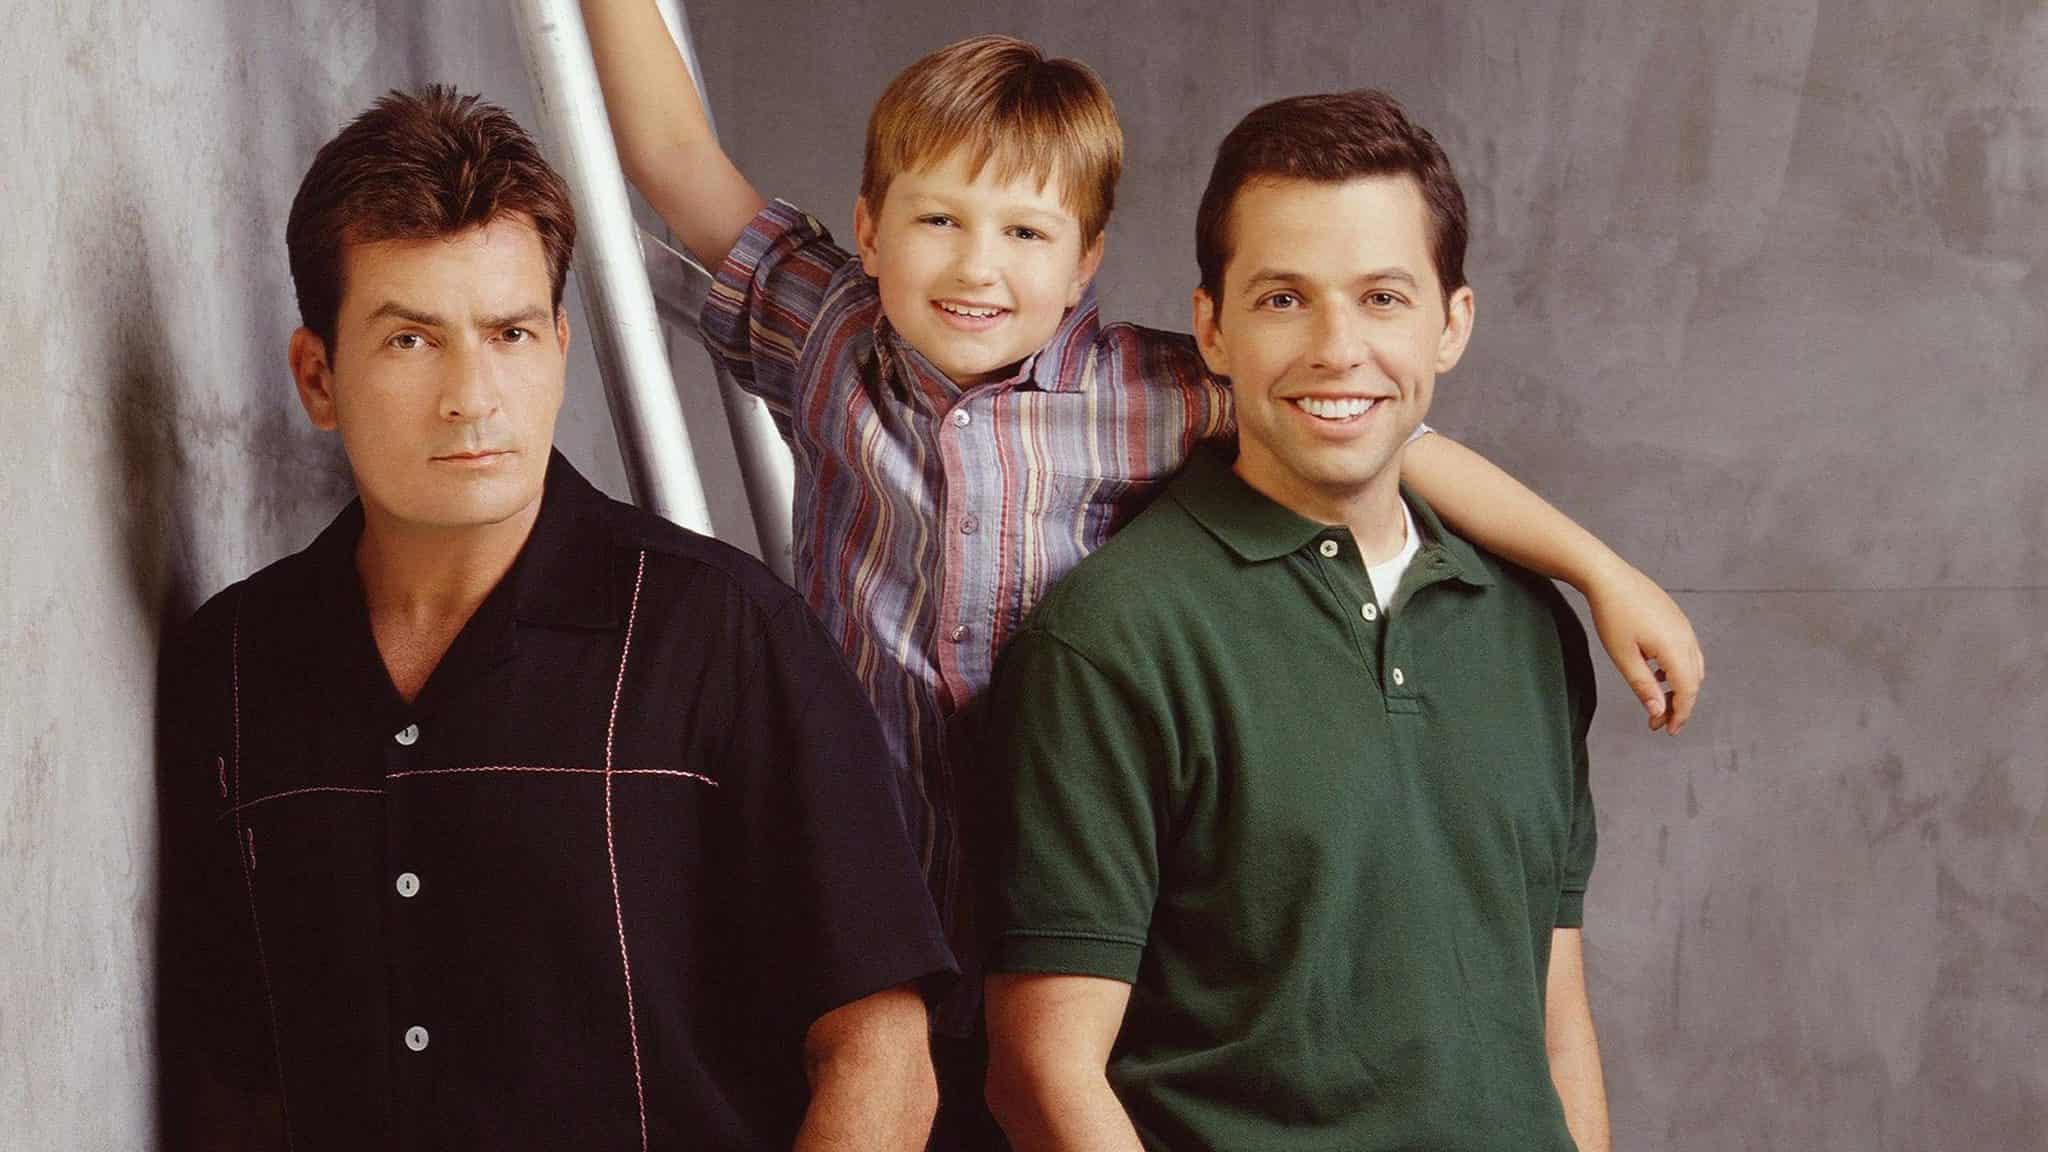 Why the Time is Right for a Two and a Half Men Reboot